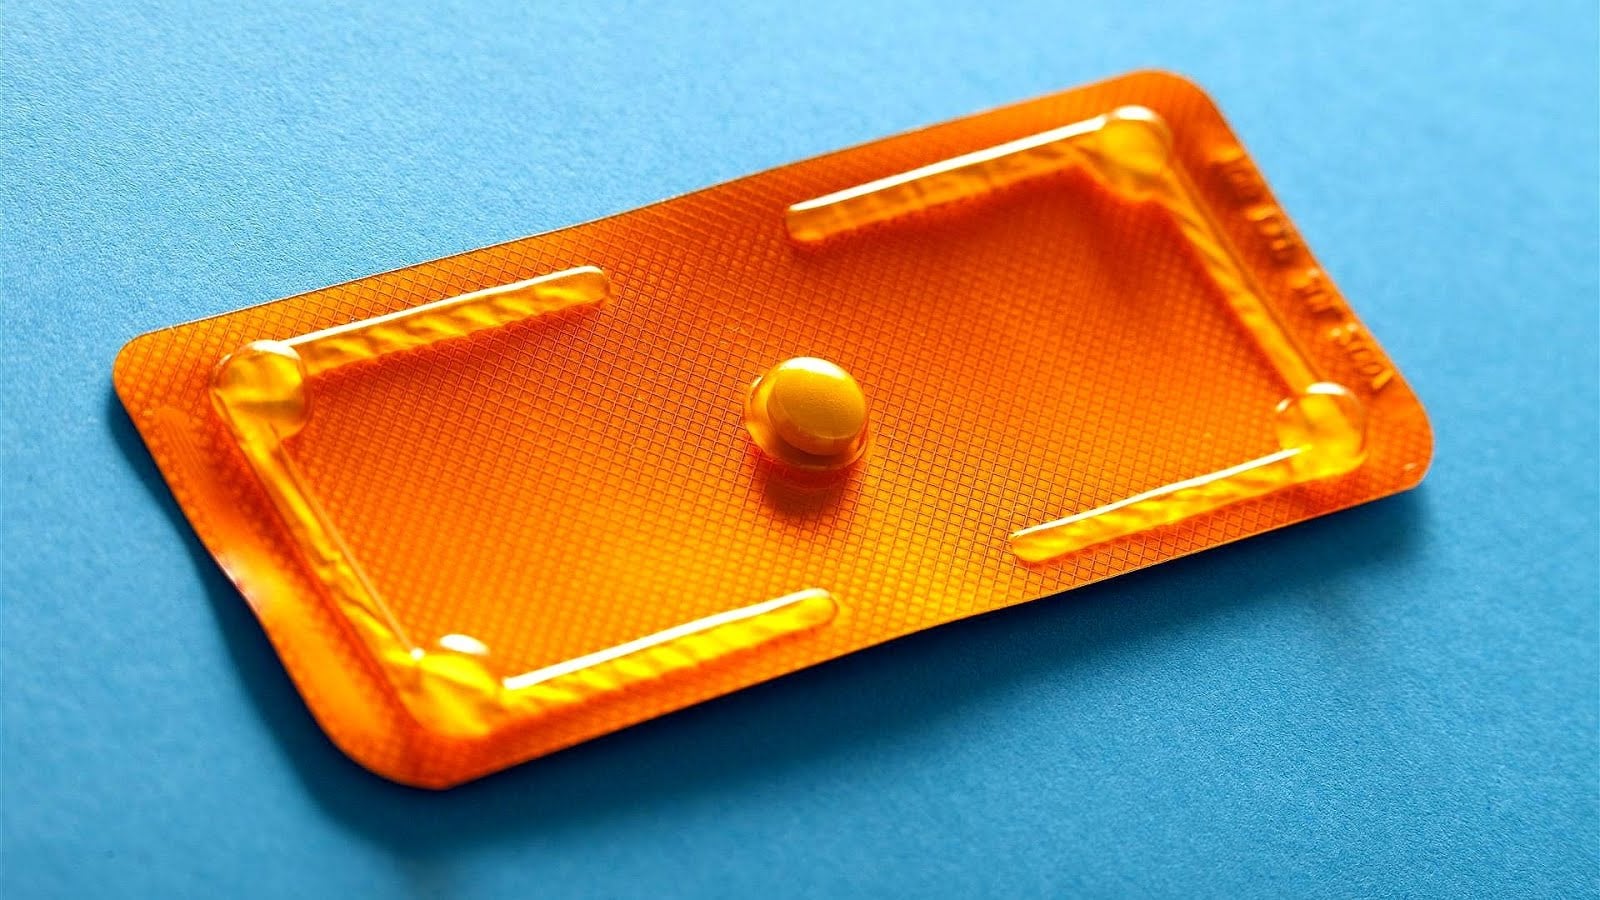 Emergency Contraception: Morning After Pill